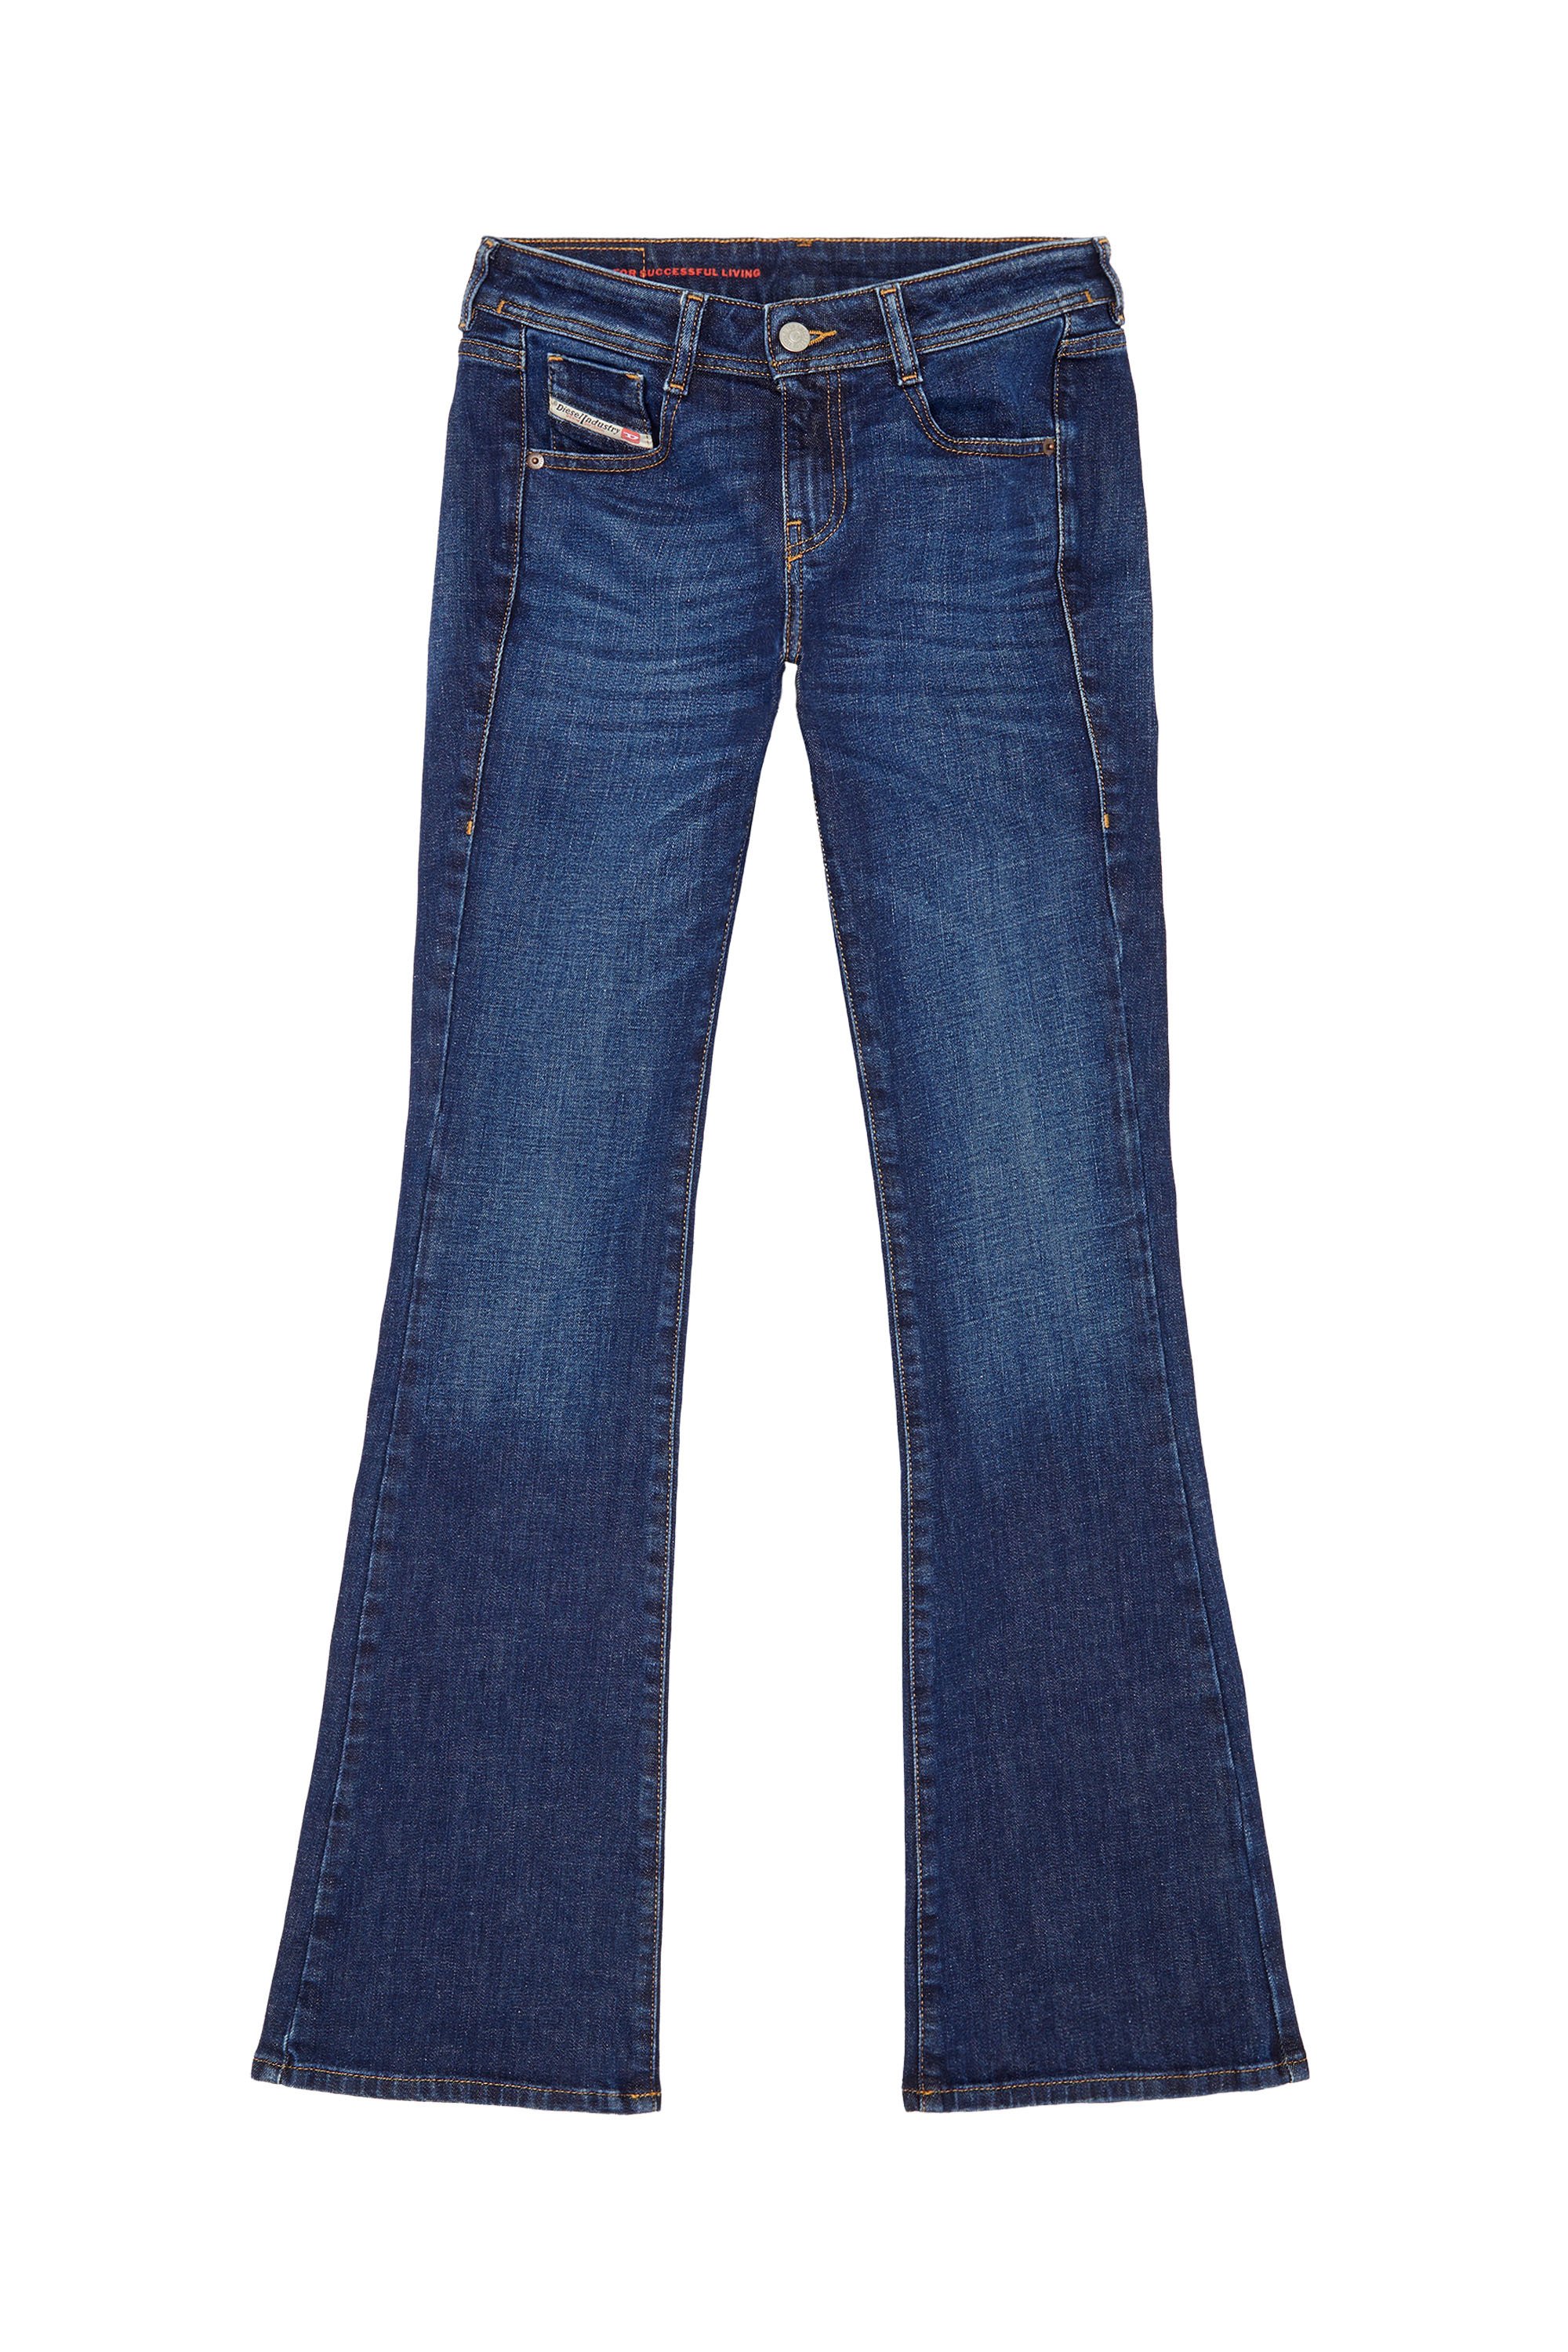 1969 D-EBBEY 09B90 Bootcut and Flare Jeans, Dunkelblau - Jeans